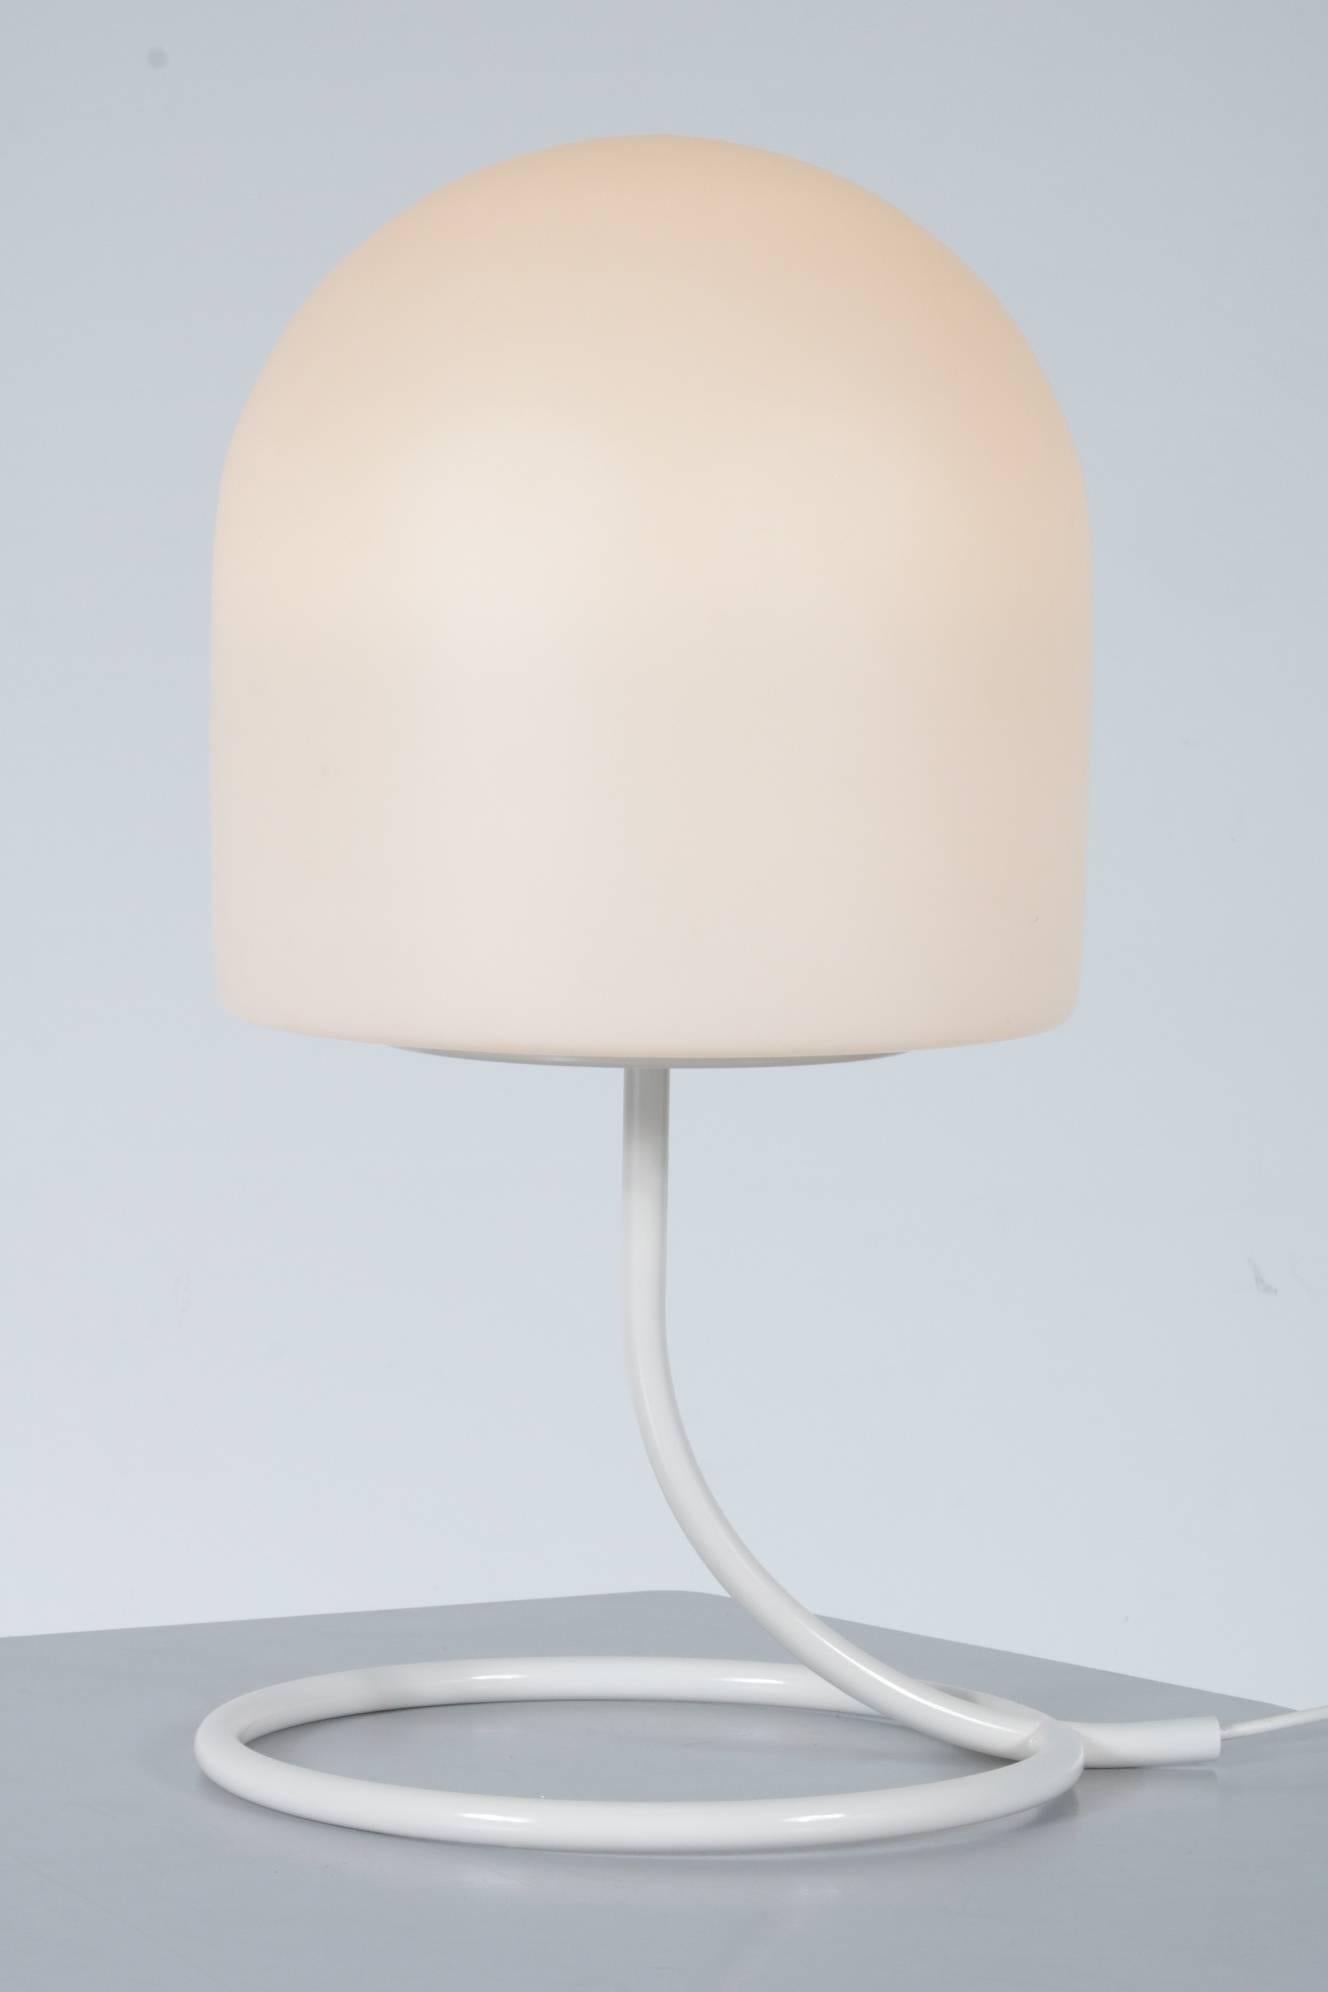 Table lamp model A250 designed by Aldo van den Nieuwelaar, manufactured by Artimeta Soest in the Netherlands in 1972.

This eye-catching lamp has a beautiful smooth design. The white lacquered metal base has a very nice curved shape holding the